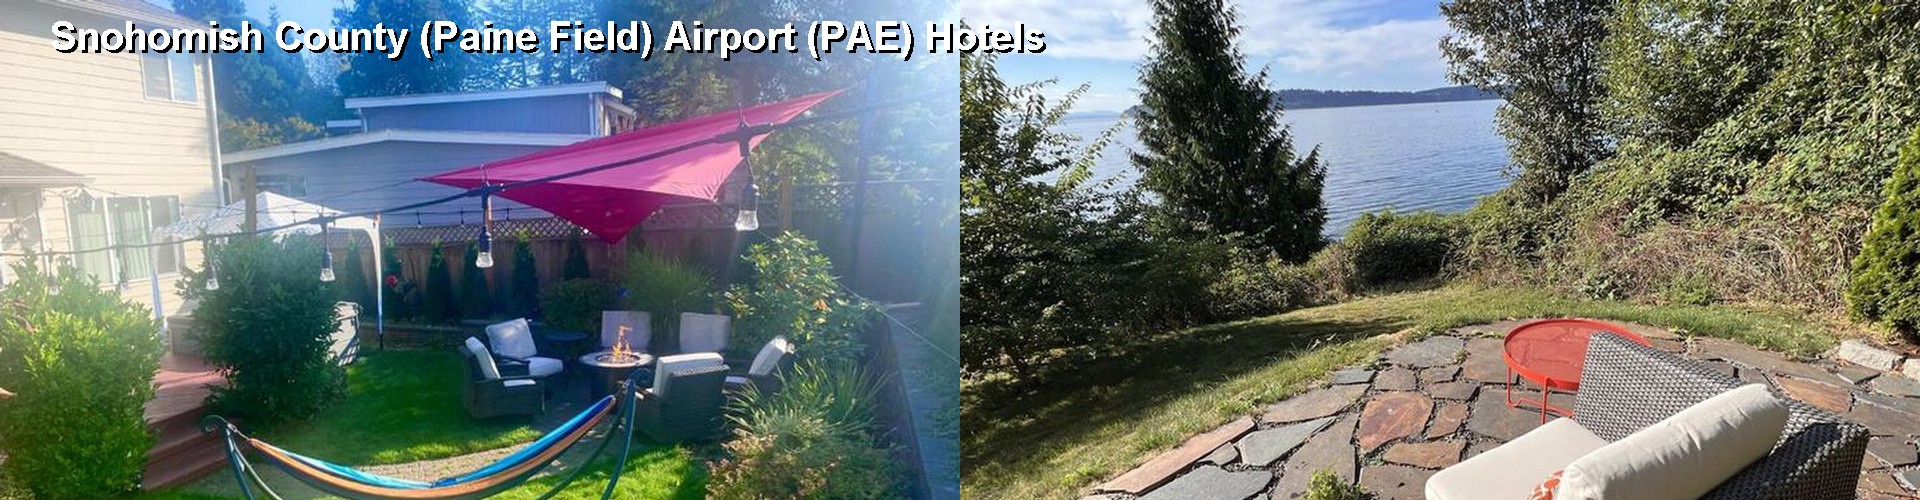 5 Best Hotels near Snohomish County (Paine Field) Airport (PAE)